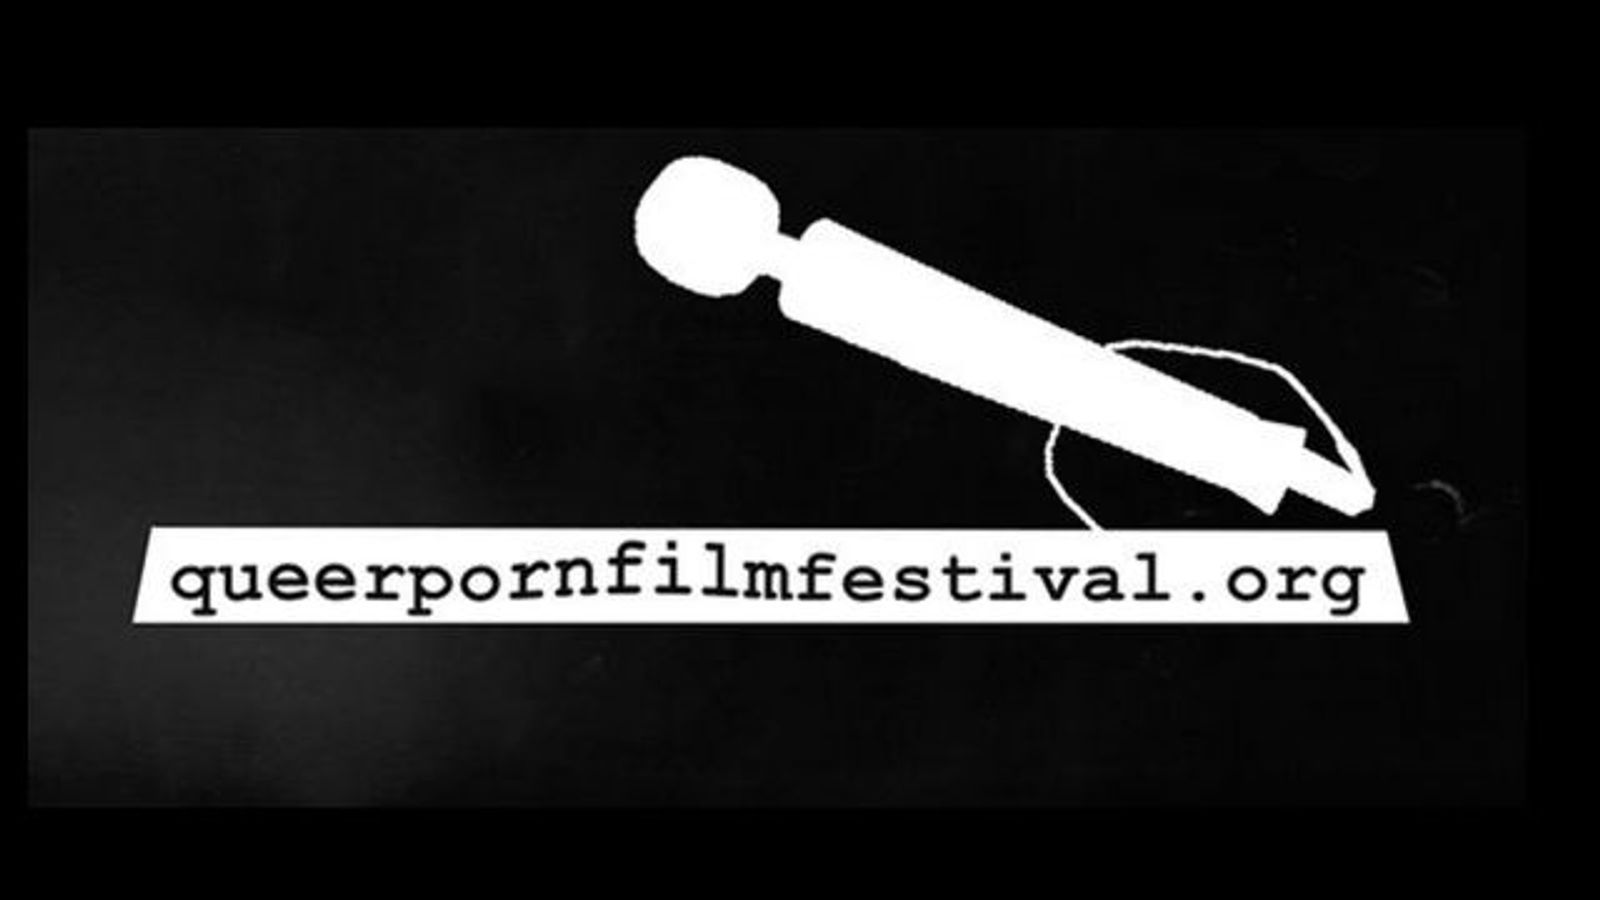 Queer Porn Film Festival to Debut in NYC This April